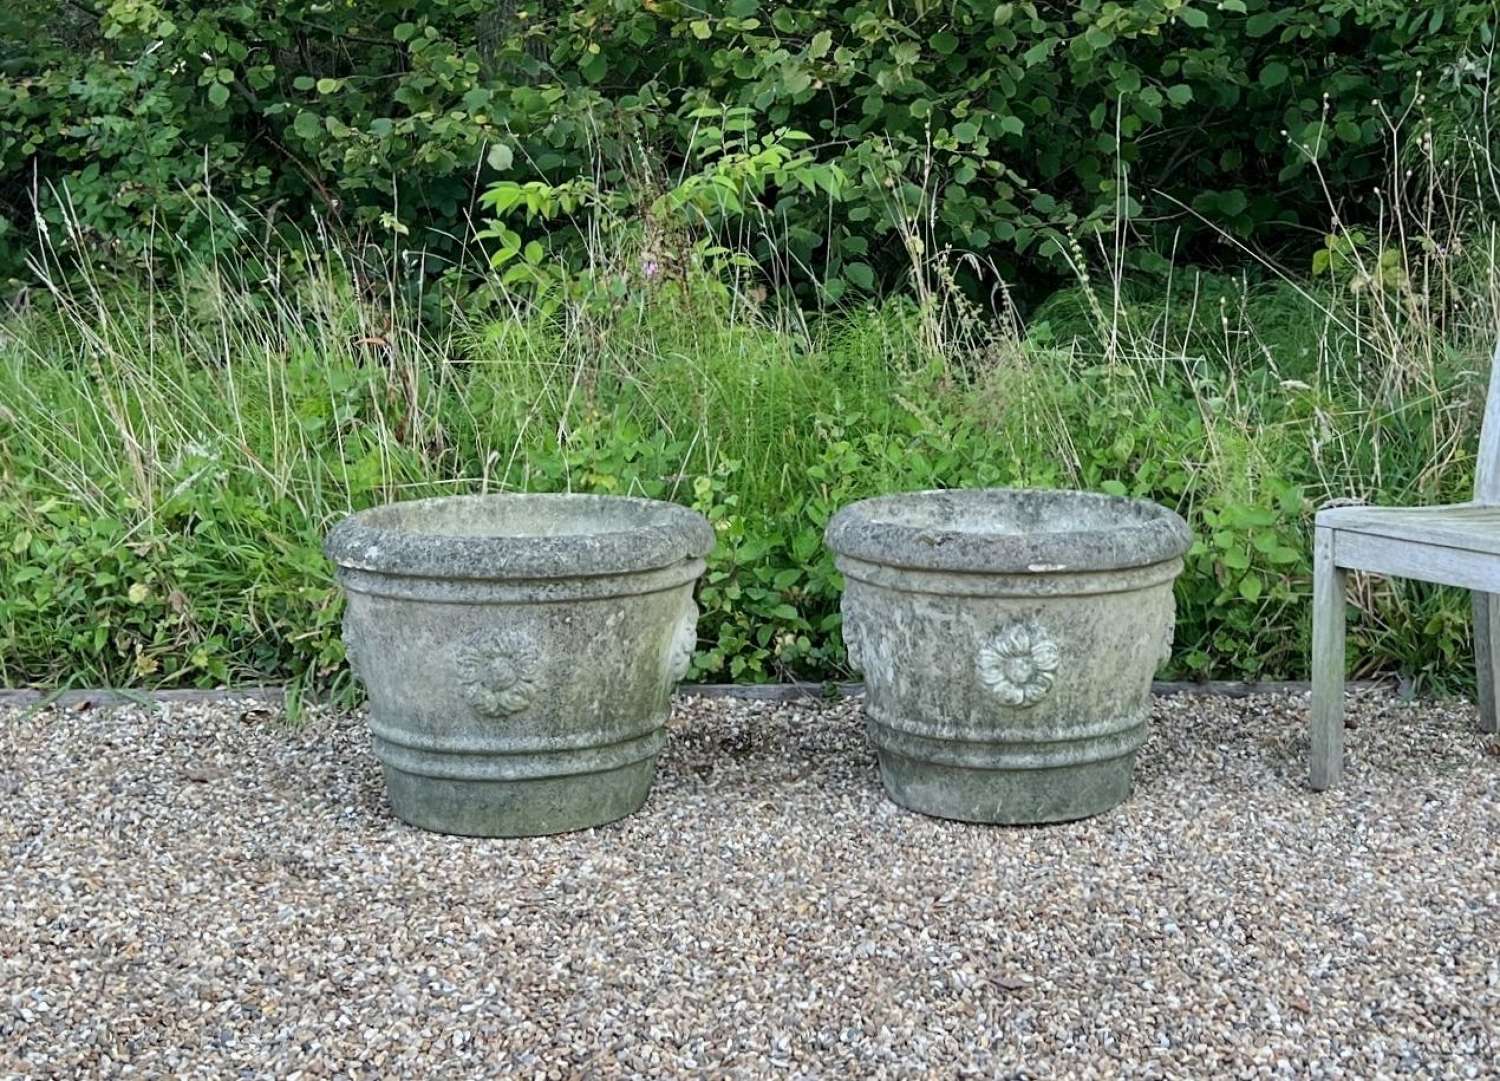 Pair of Large Flower Planters